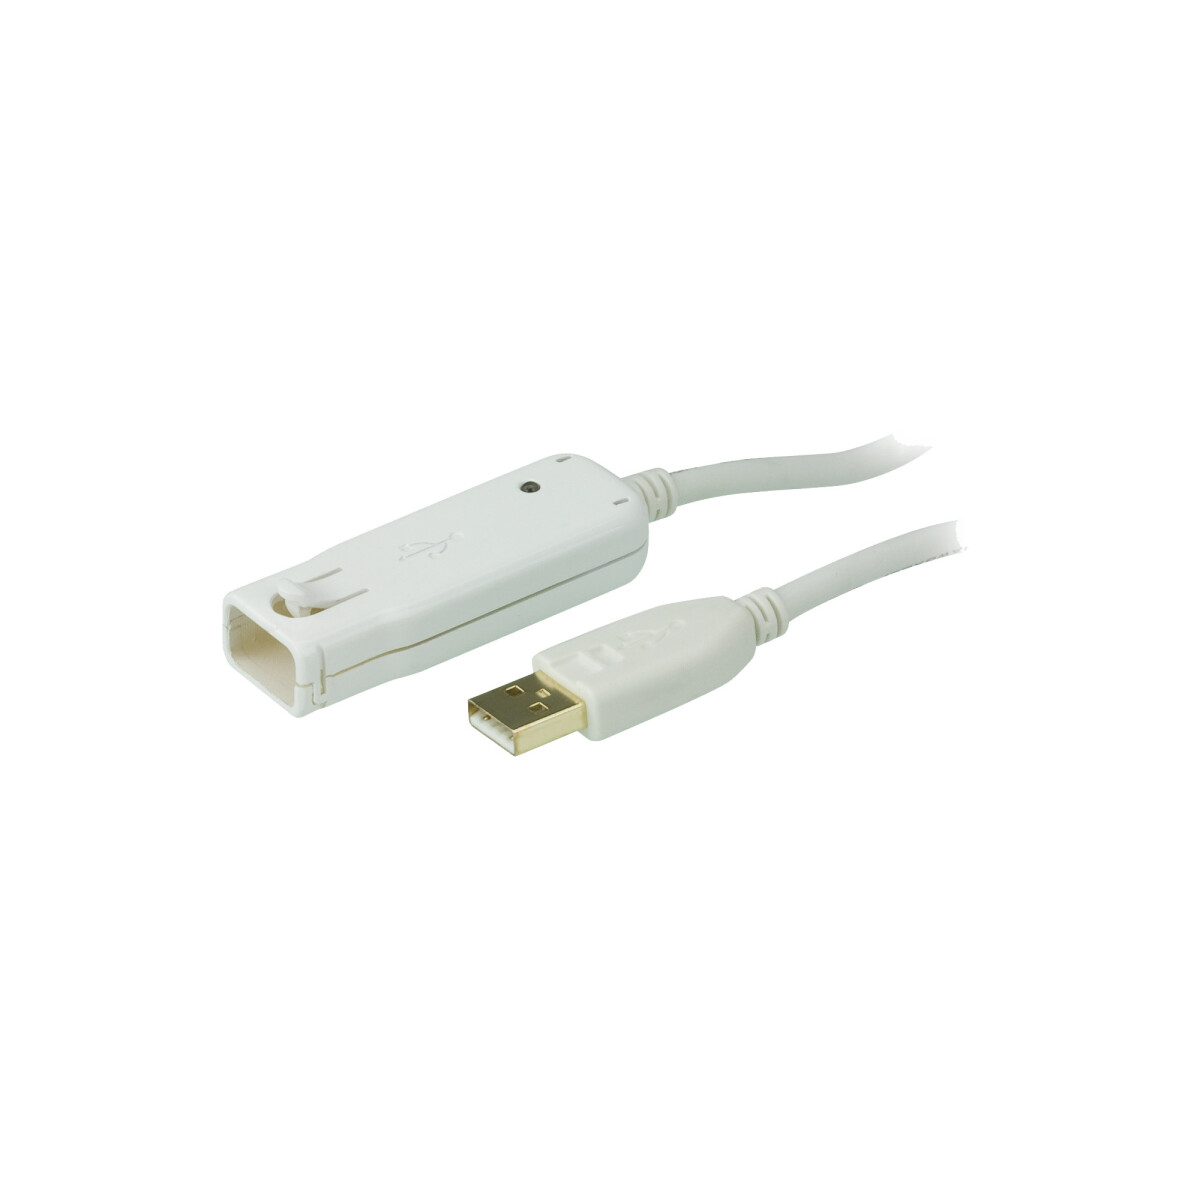 USB 2.0 active extension cable, ATEN UE2120, USB A M/F, 12m